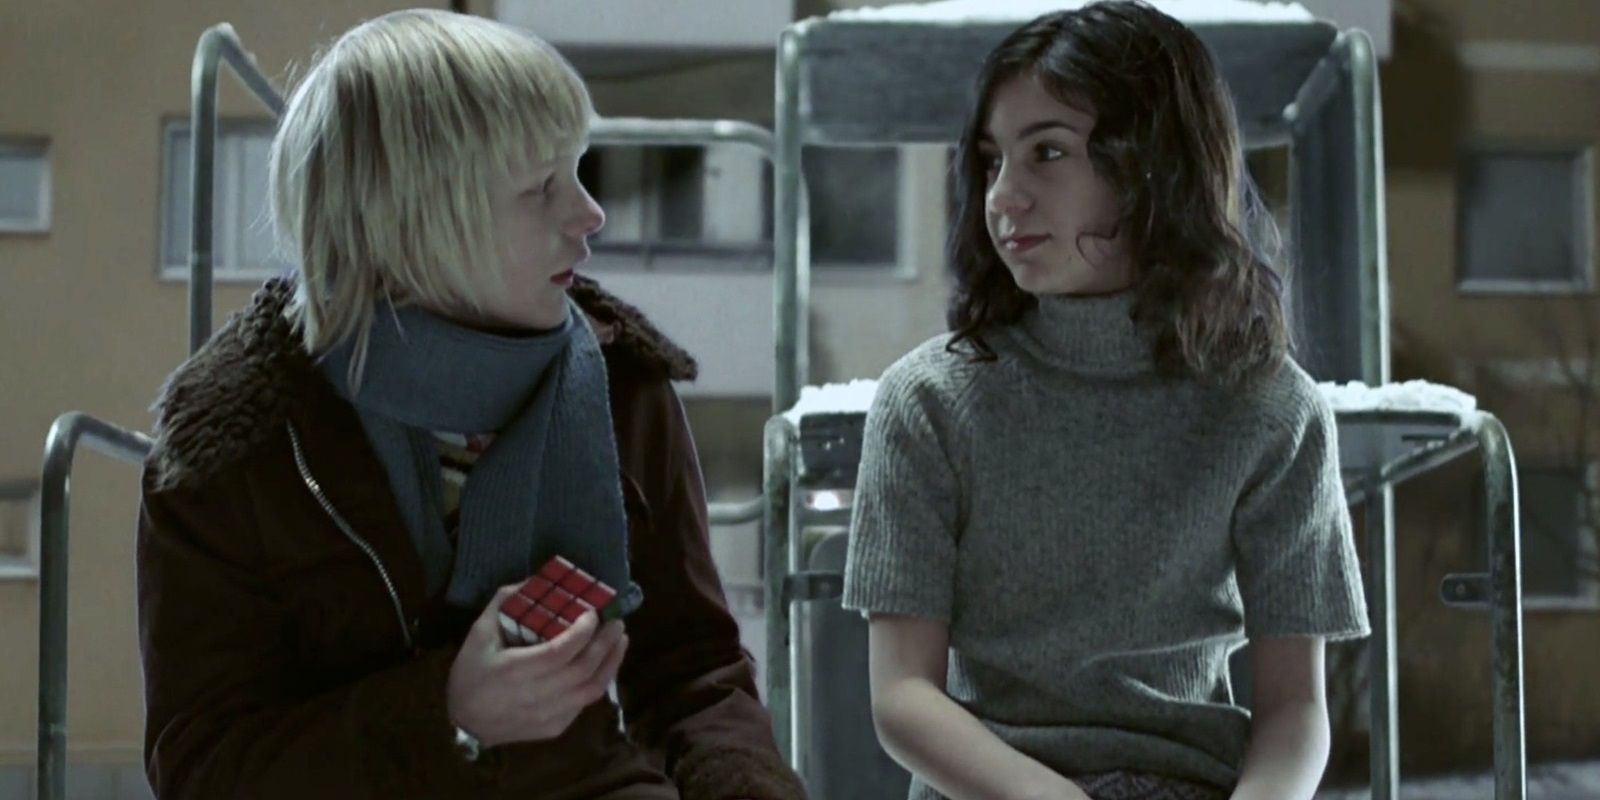 Oskar and Eli hang out in Let the Right One In